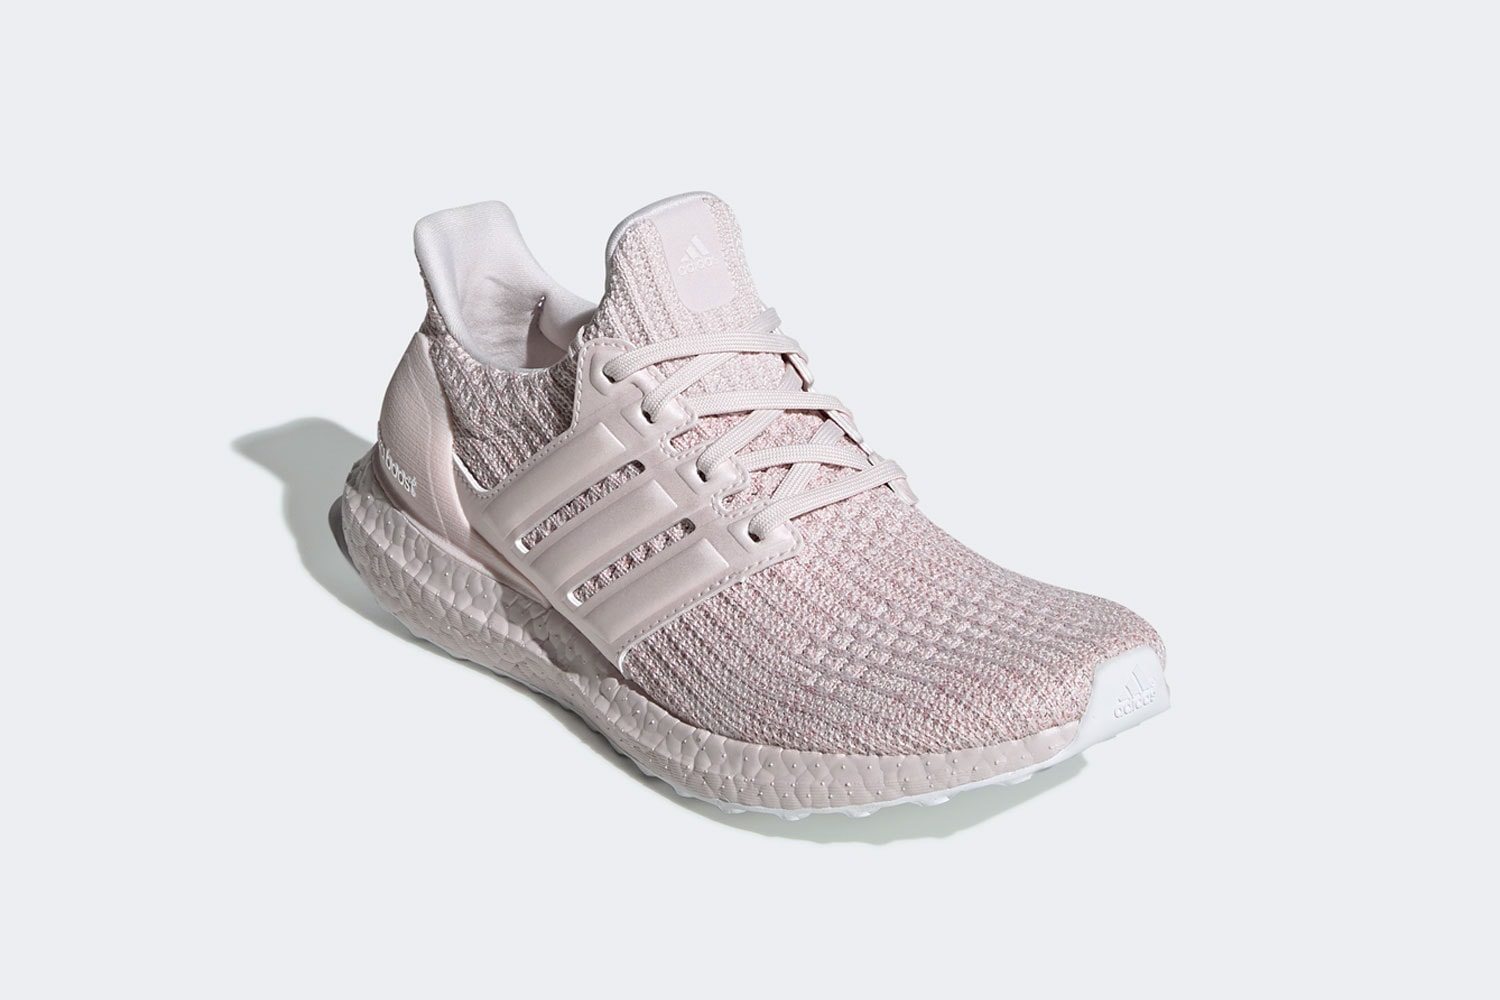 adidas ultraboost running shoes sneakers orchid tint pink